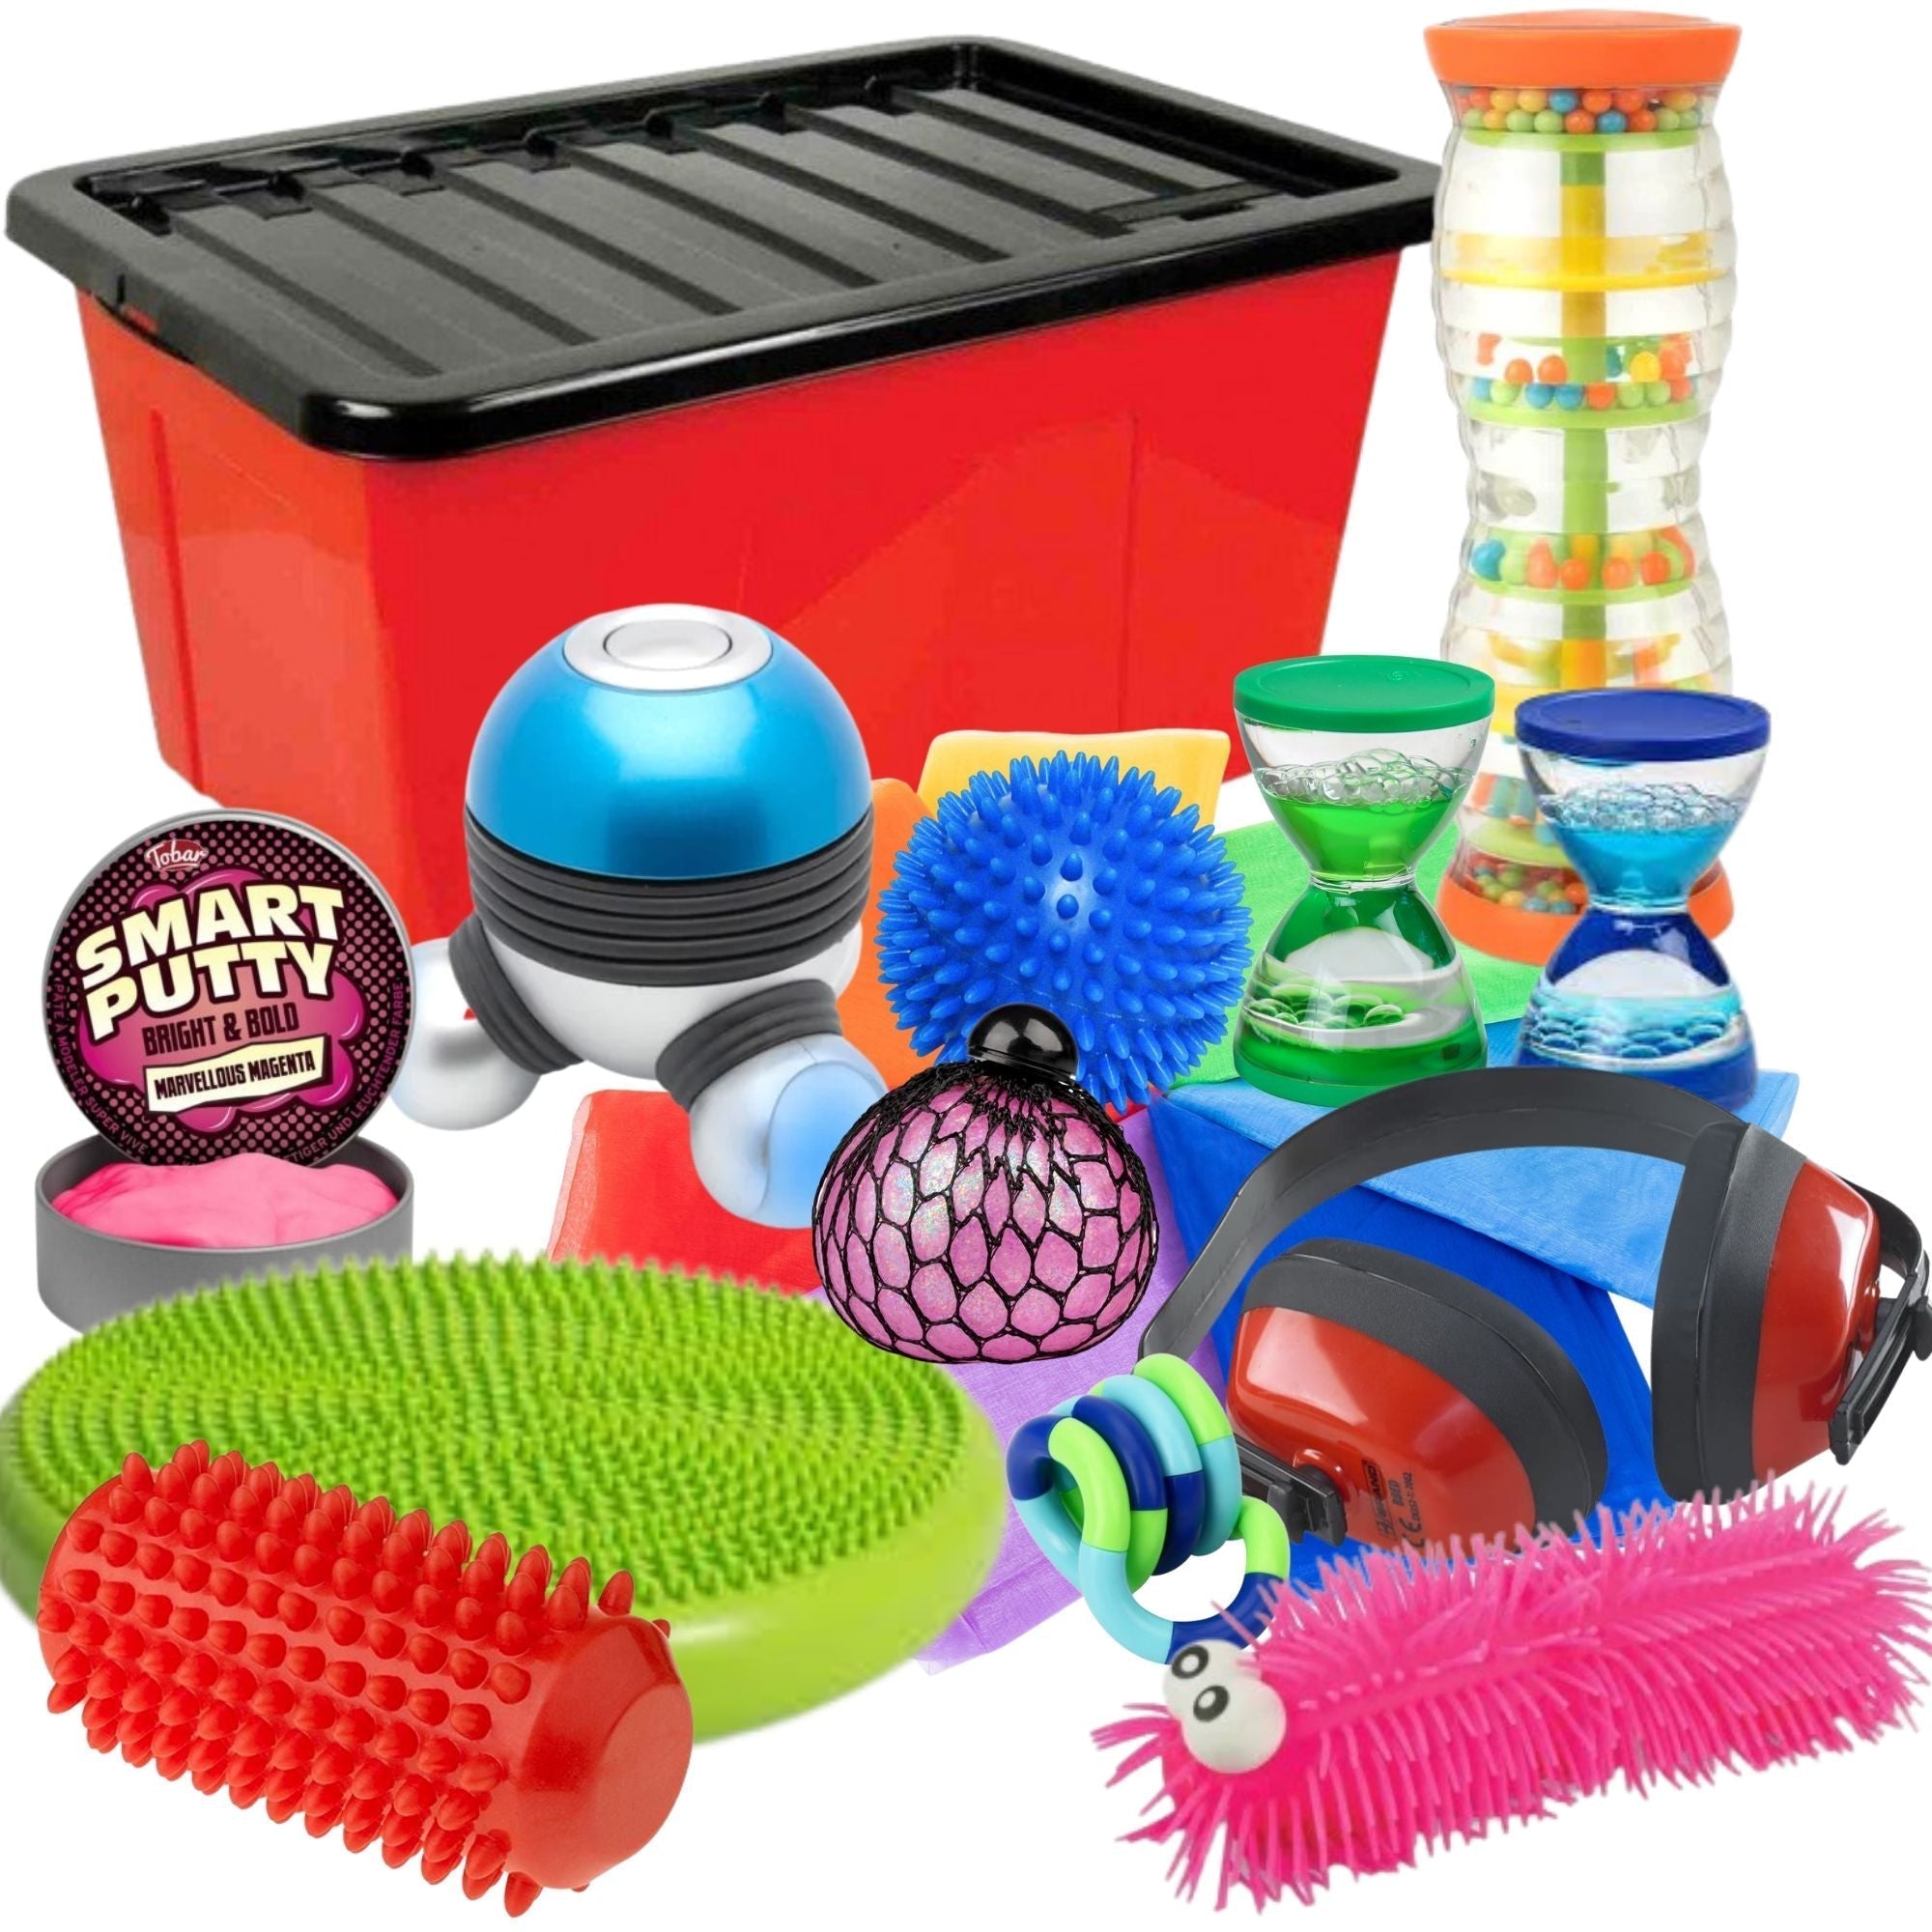 Classroom Break Box, NEW FOR 2022/2023 LAUNCHED 8TH OCTOBER When children start fidgeting and getting restless, Reach out for the fantastic Classroom Break Box! This complete classroom break box sensory kit is packed with our some of our best sensory toys and goodies, our Break Boxes provide an outlet for children to channel their inner spirit and regulate feelings and emotions through play. Provide a focal point for children to stop Fidgeting with therapeutic activities Sensory Tools to develop fine motor 